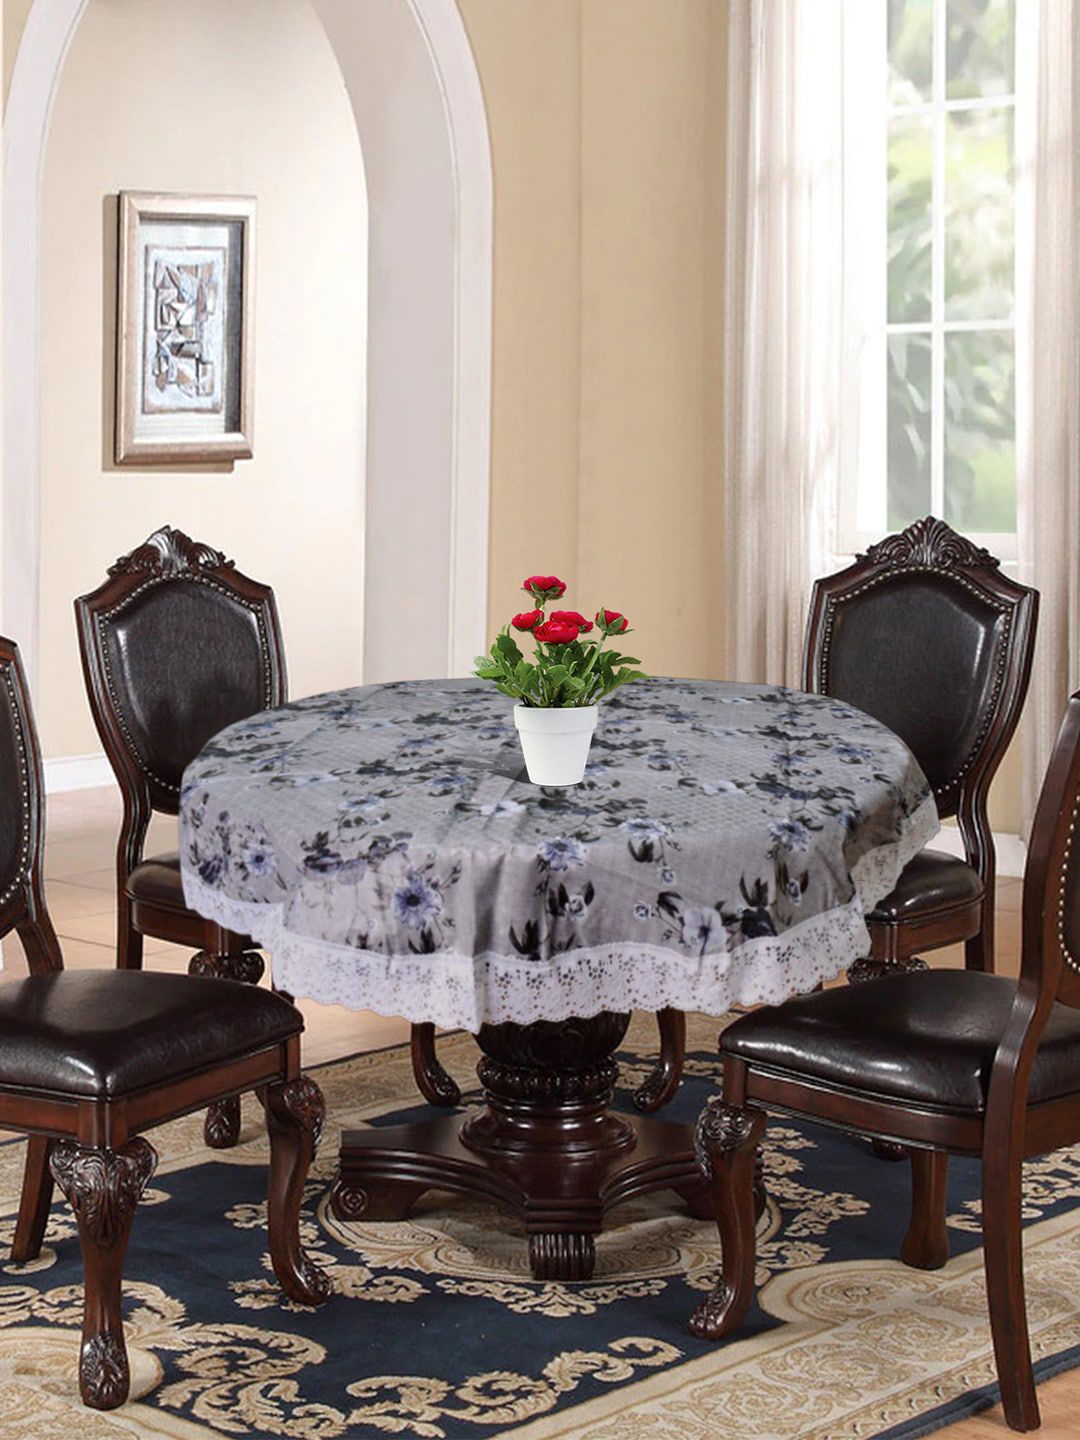 Kuber Industries Grey Printed 4 Seater Round Table Cover Price in India